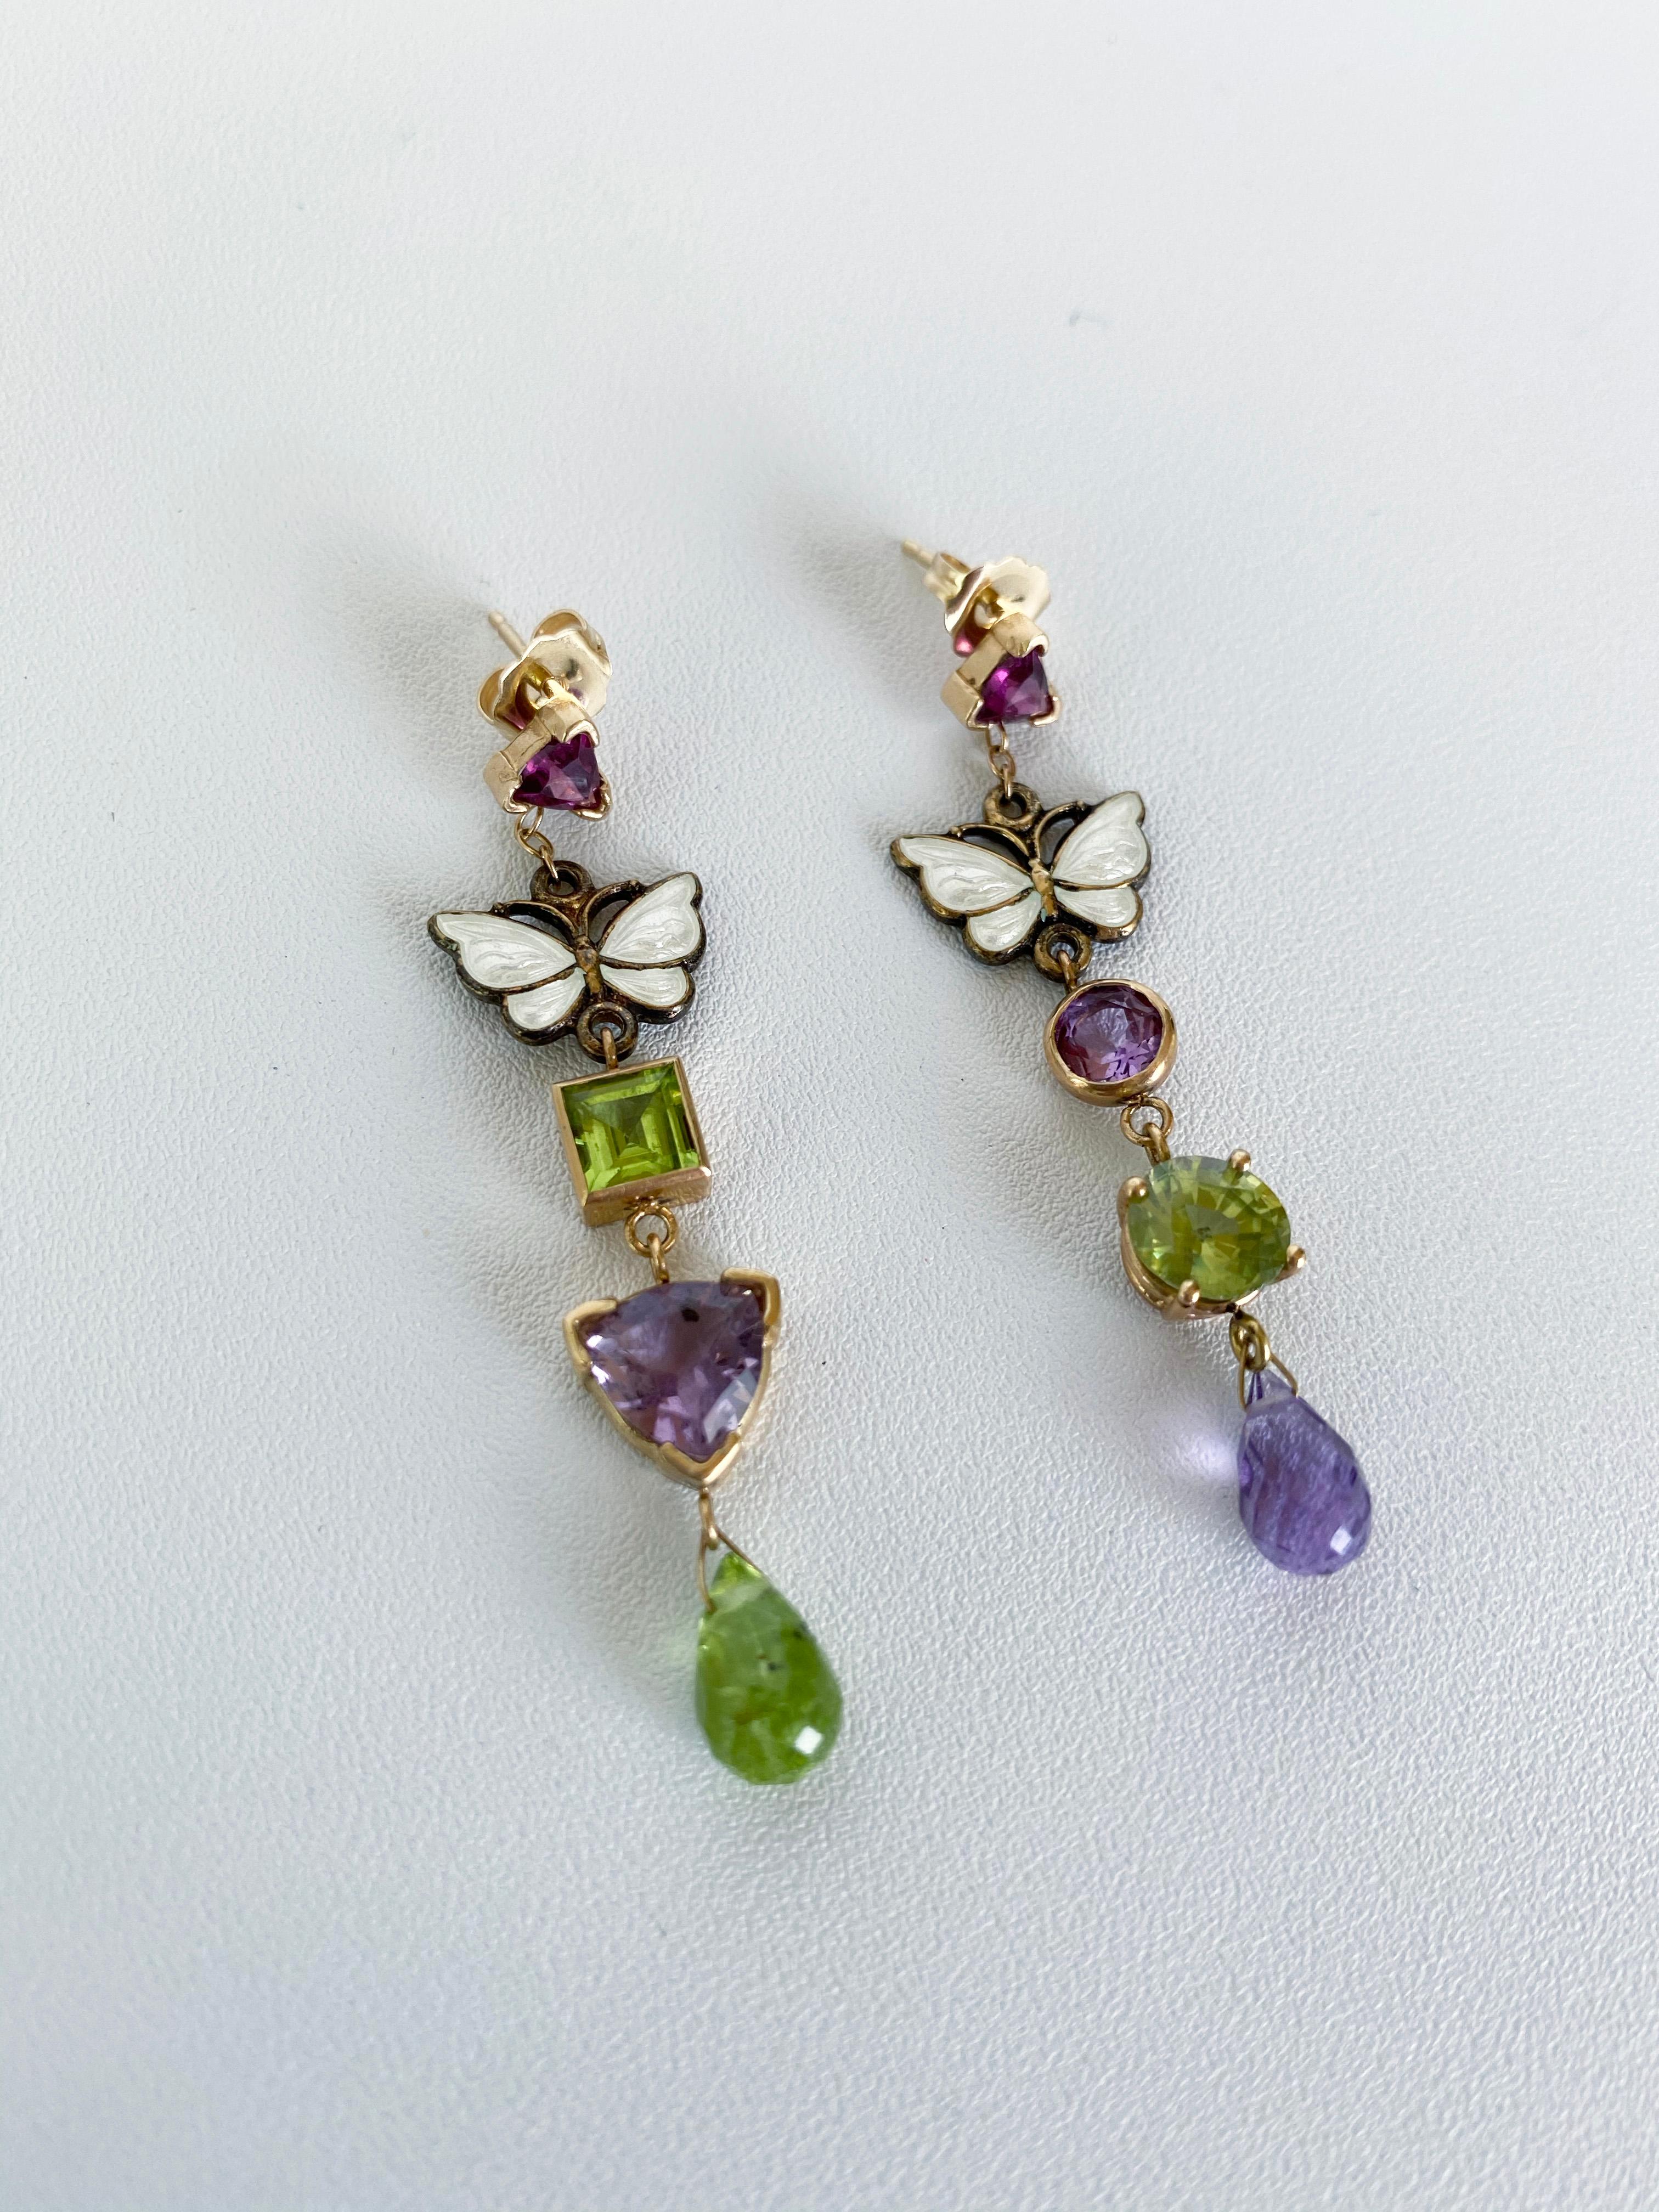 These beautiful colorful earrings feature vintage enamel butterflies over Sterling Silver. Adorned in Garnet, Amethyst and Peridot stones set multi-shaped in 14k Yellow Gold. These playful and versatile earrings can be worn up or down, and are a